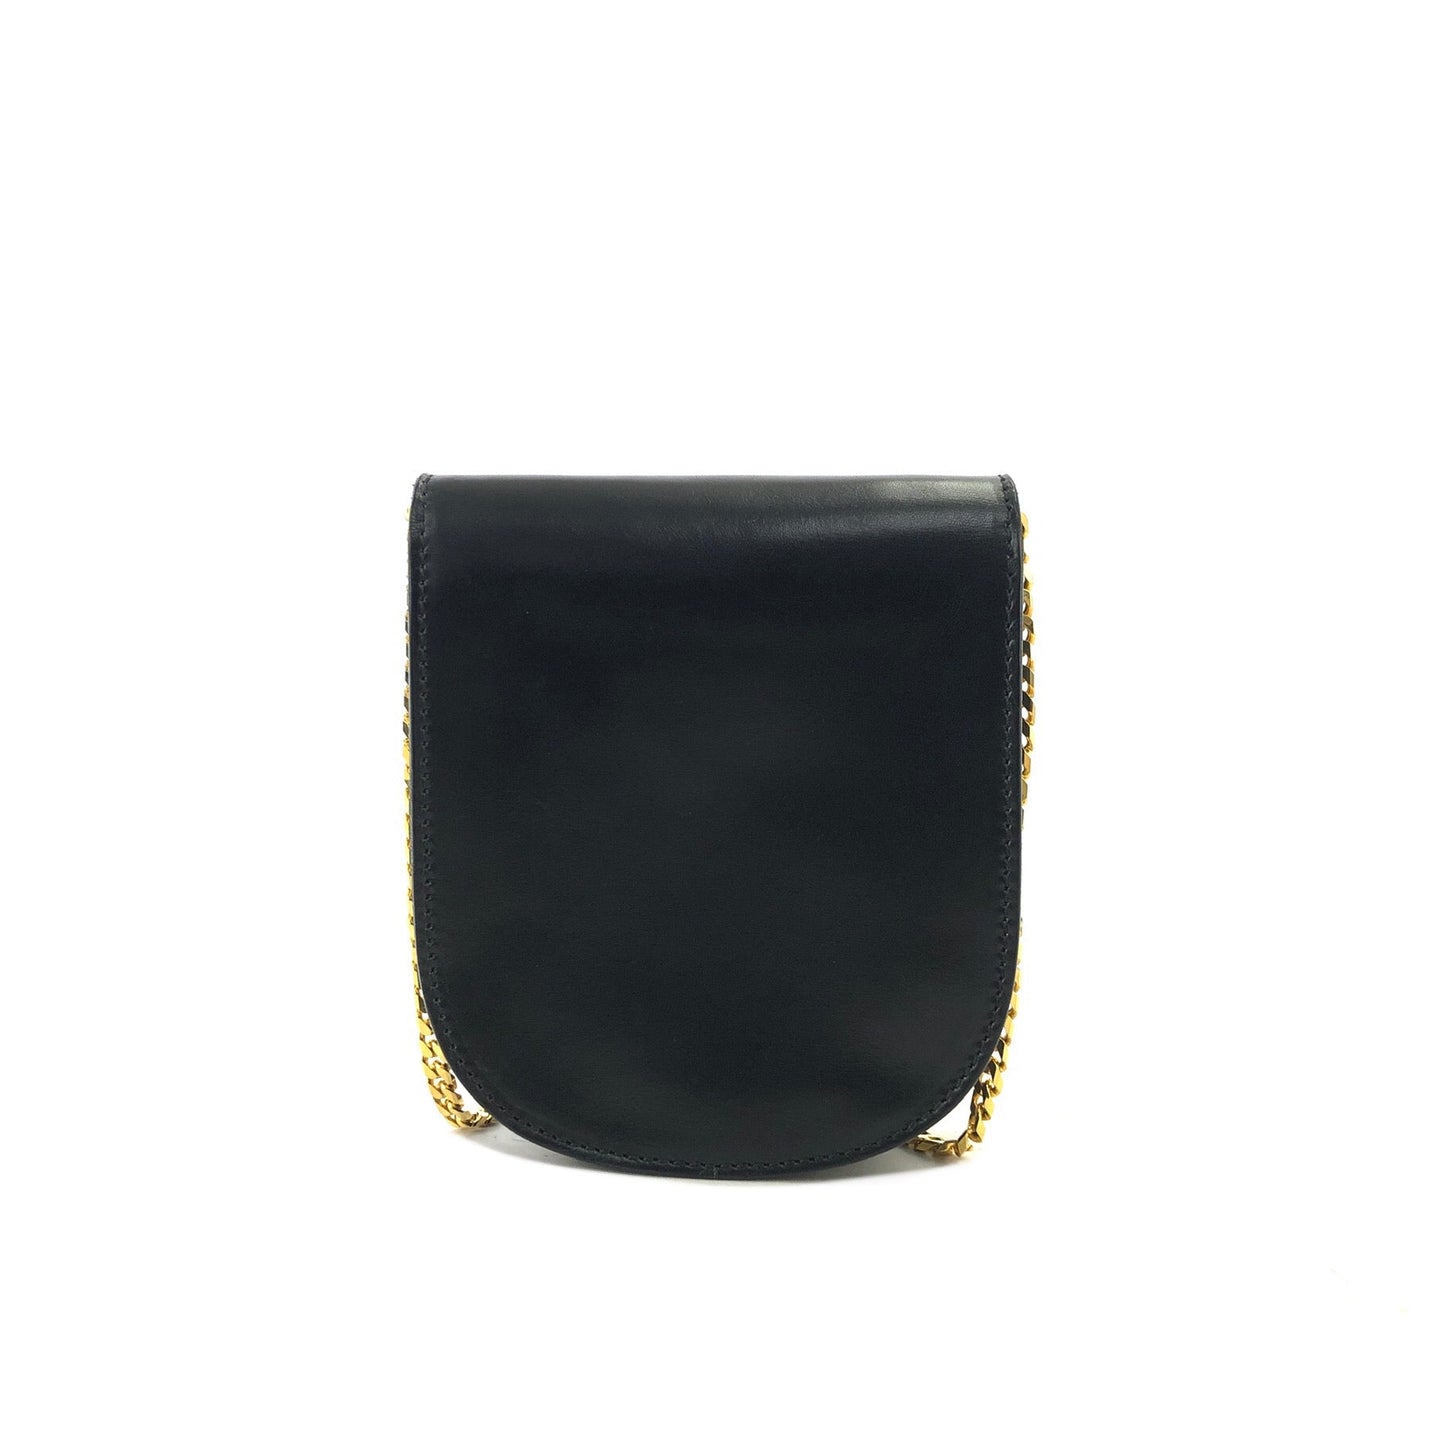 CELINE Starball Cut out Leather Chain Black pwwxve